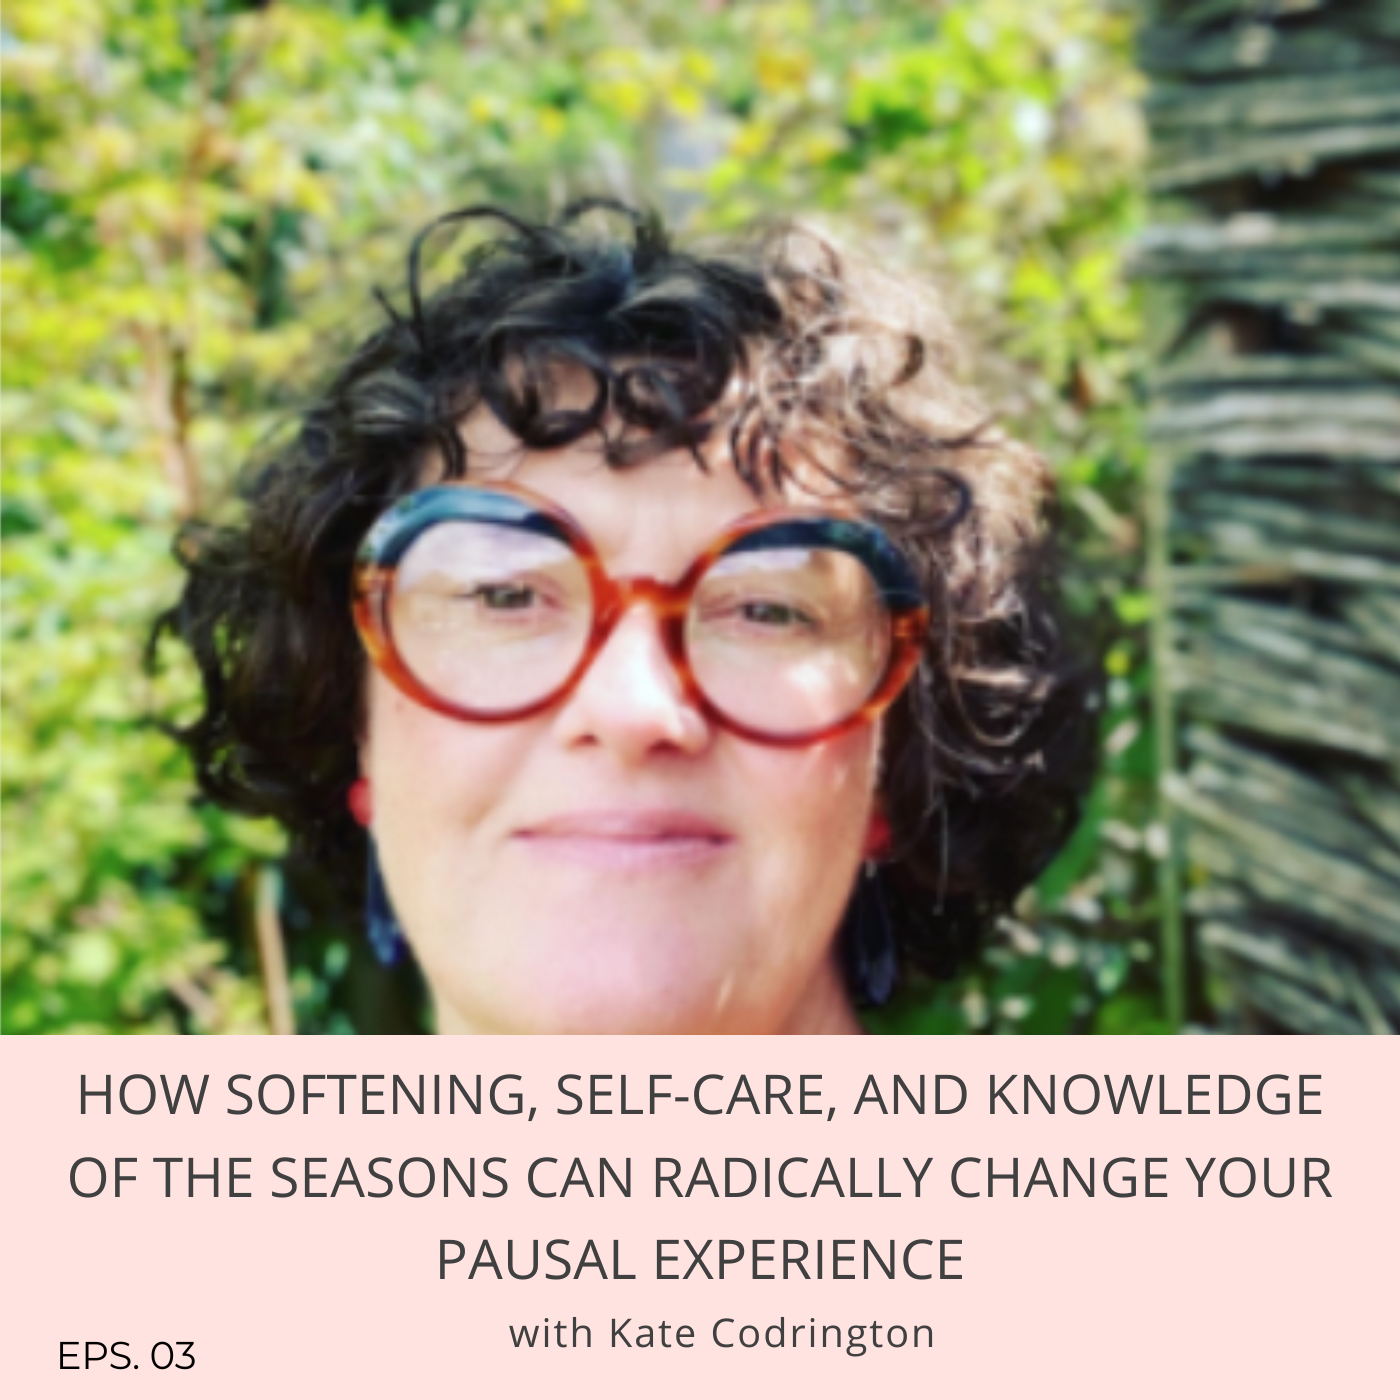 Episode 3: How softening, self-care, and knowledge of the seasons can radically change your pausal experience with Kate Codrington, author of Second Spring: The Self-Care Guide to Menopause